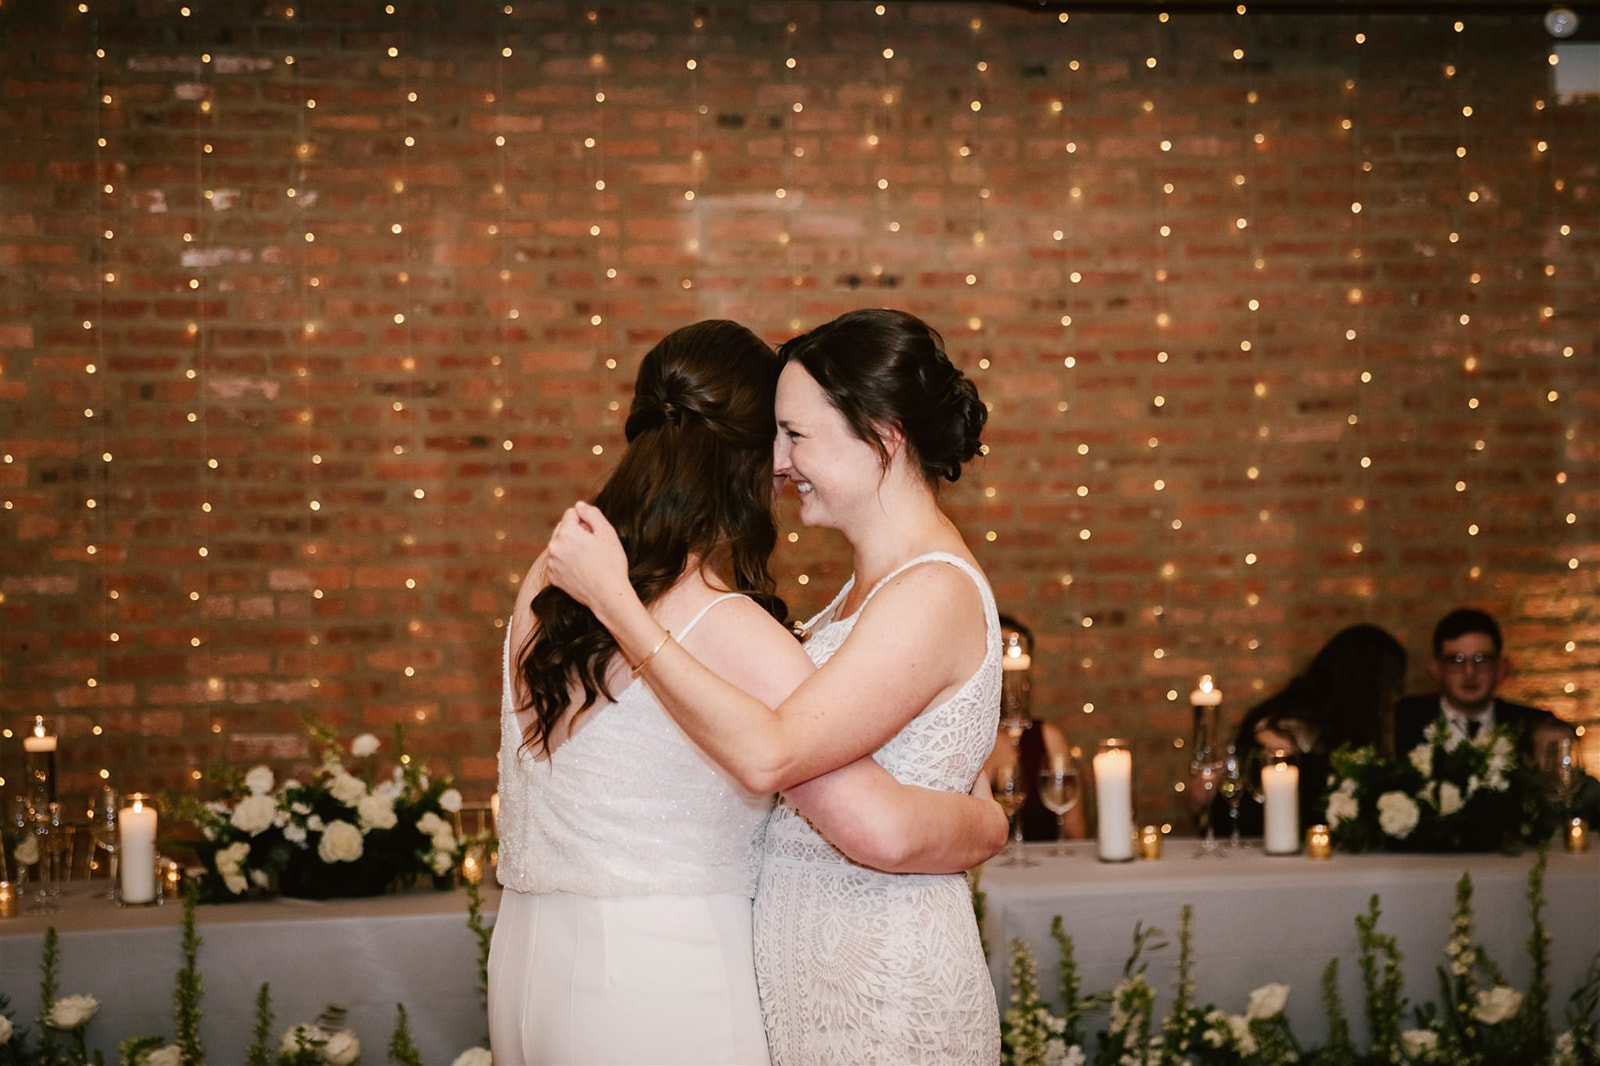 Two brides sharing their first dance at Loft on Lake, showcasing a moment of love and celebration.